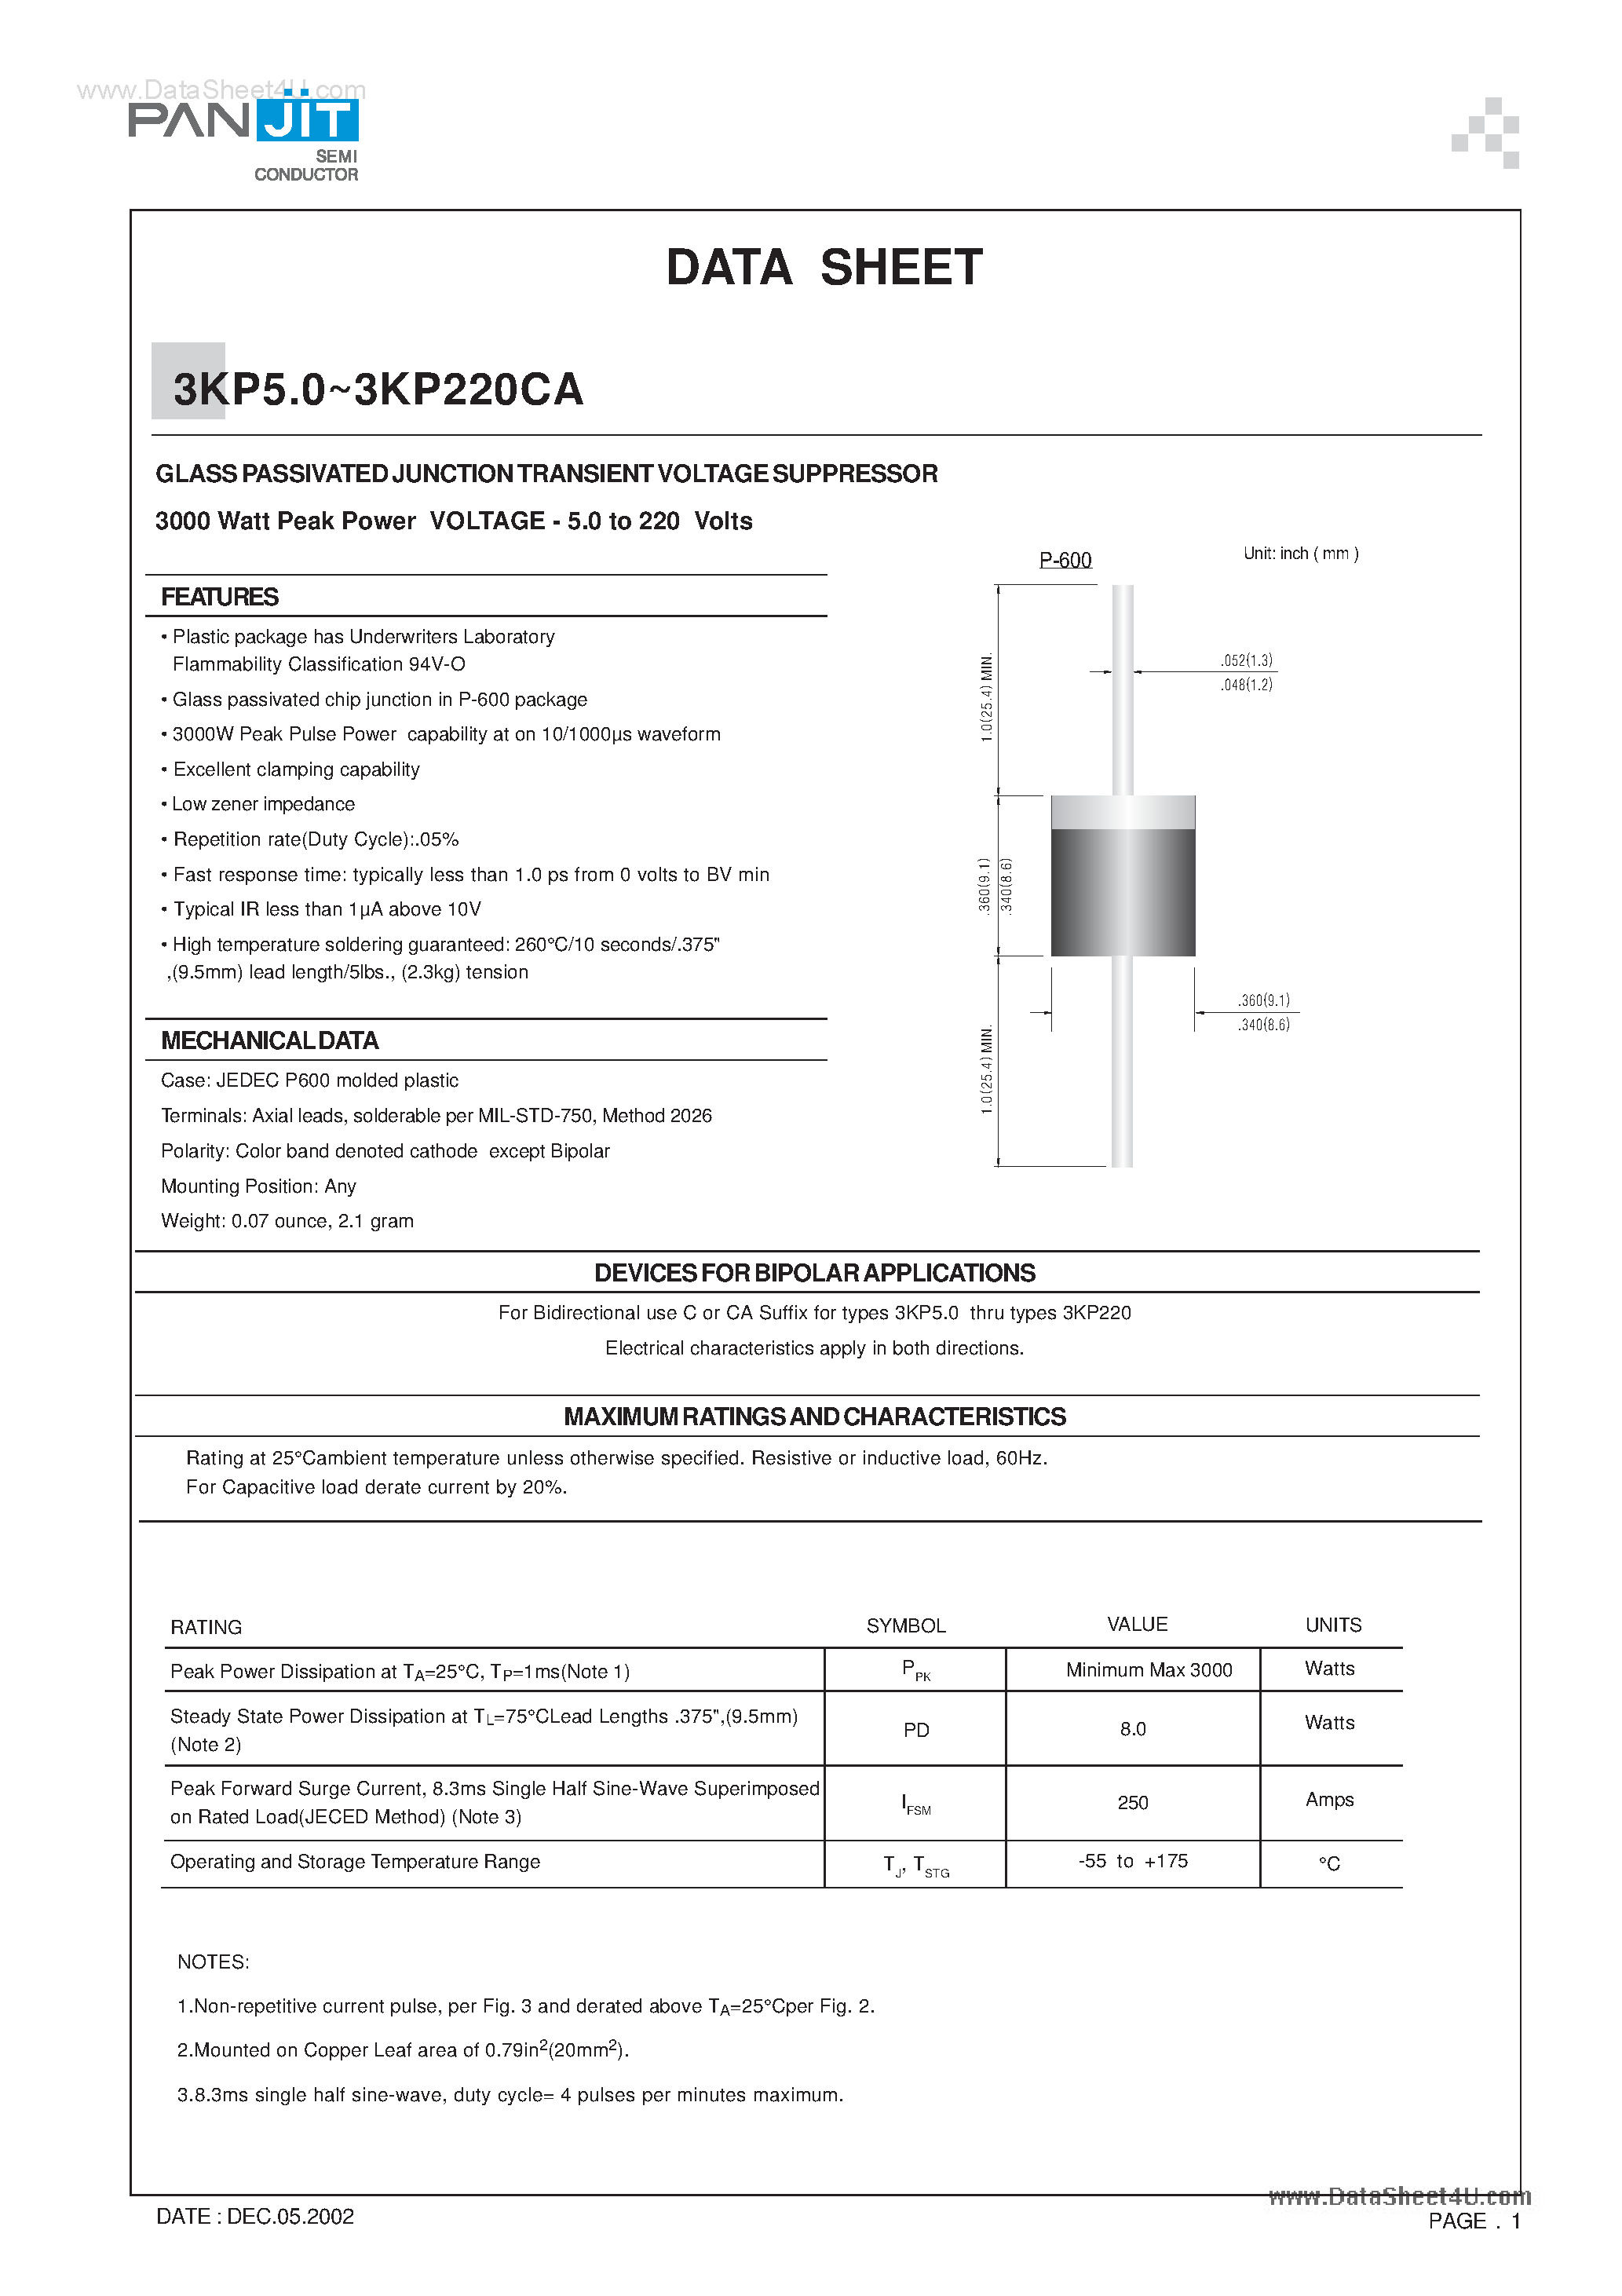 Datasheet 3KP10 - (3KP5.0 - 3KP220CA) GLASS PASSIVATED JUNCTION TRANSIENT VOLTAGE SUPPRESSOR page 1